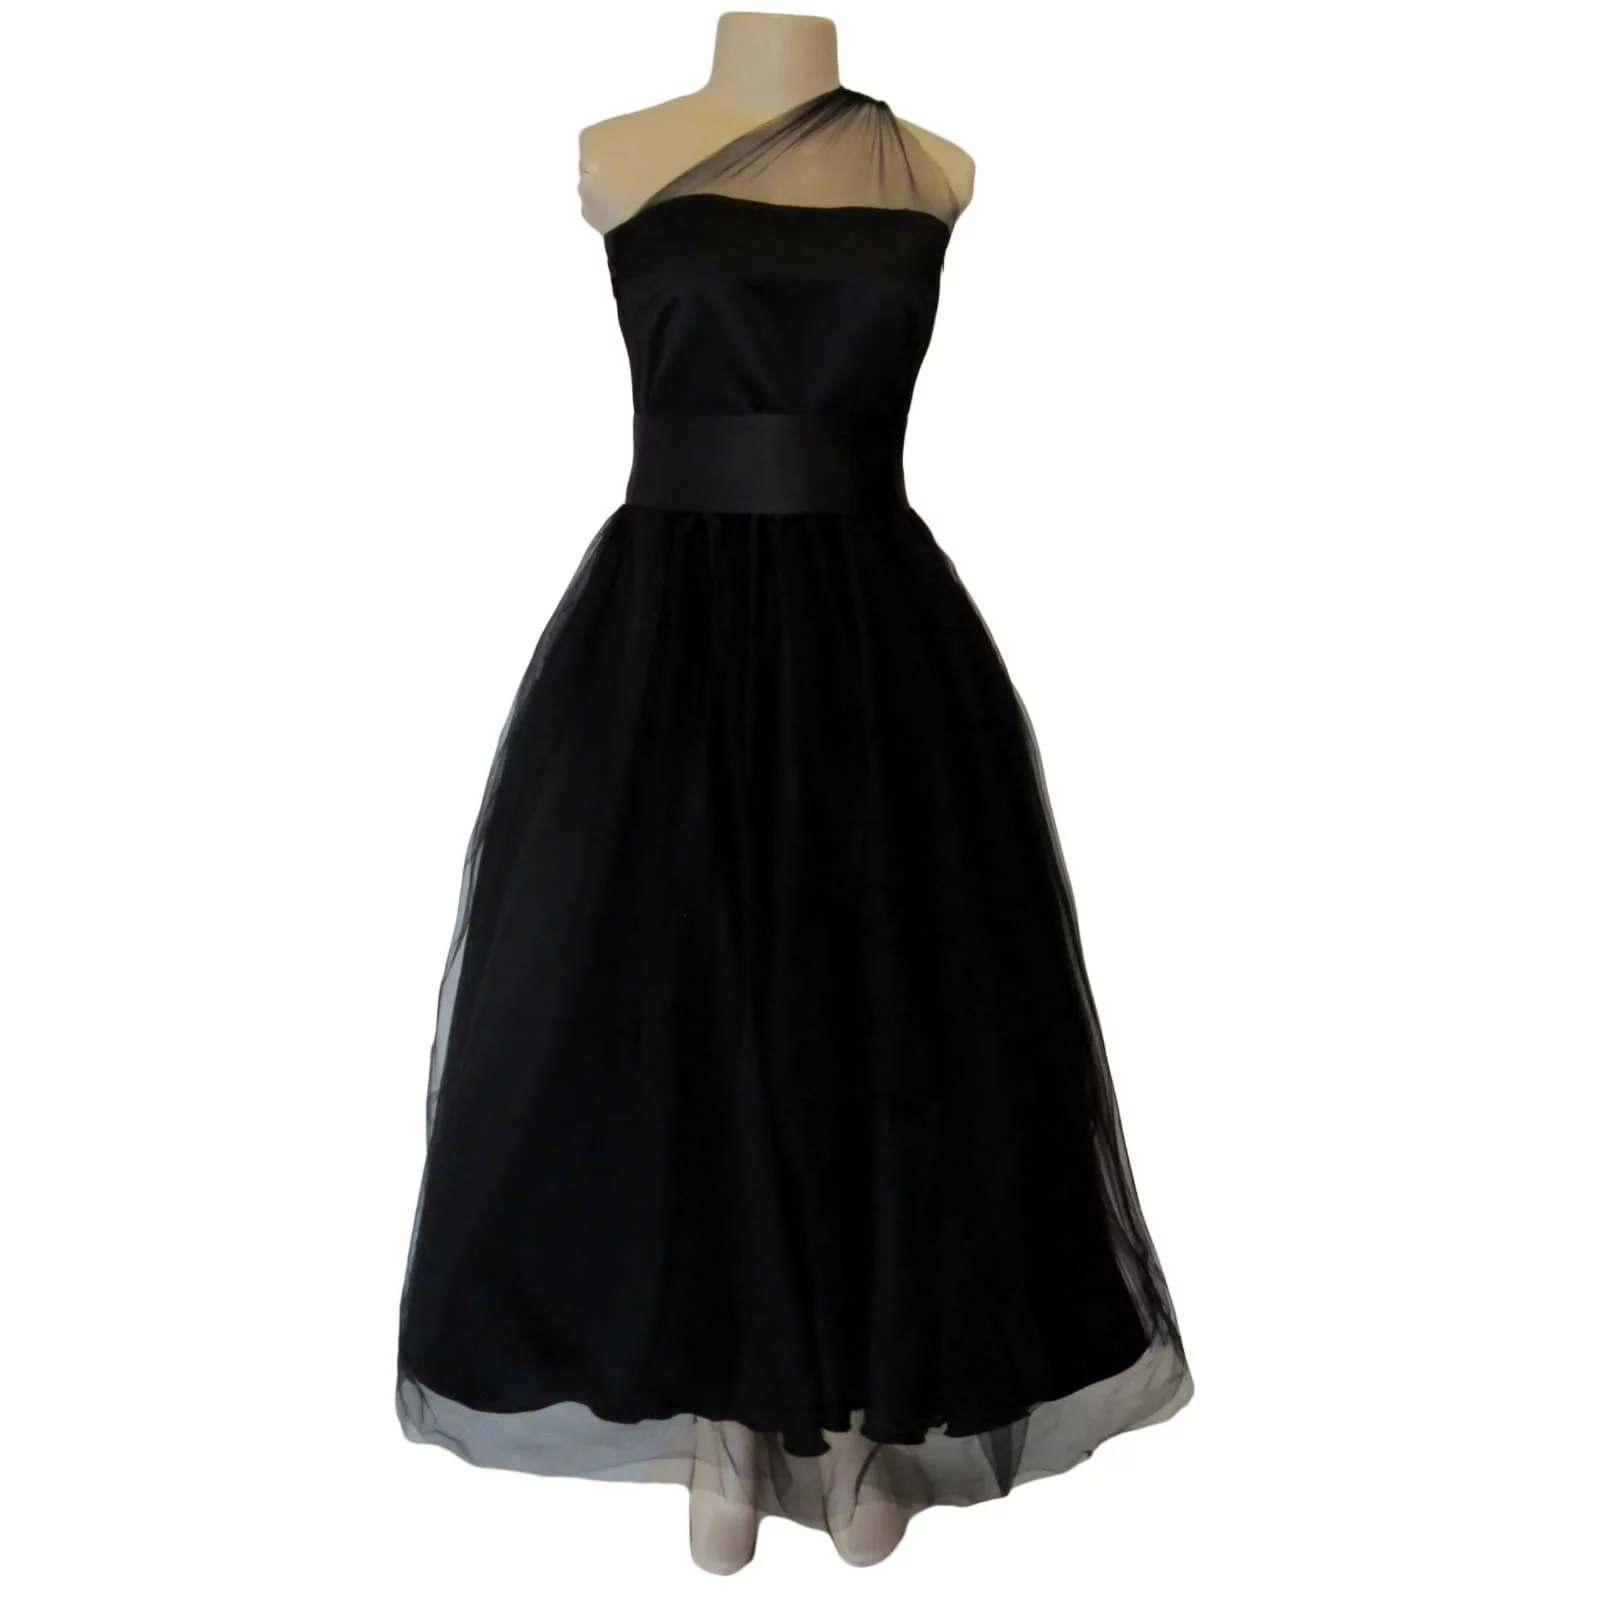 Back ankle length evening party dress 4 back ankle-length evening party dress, overlay with tulle, with a high waisted satin belt. Bodice with tulle creating a one-shoulder design